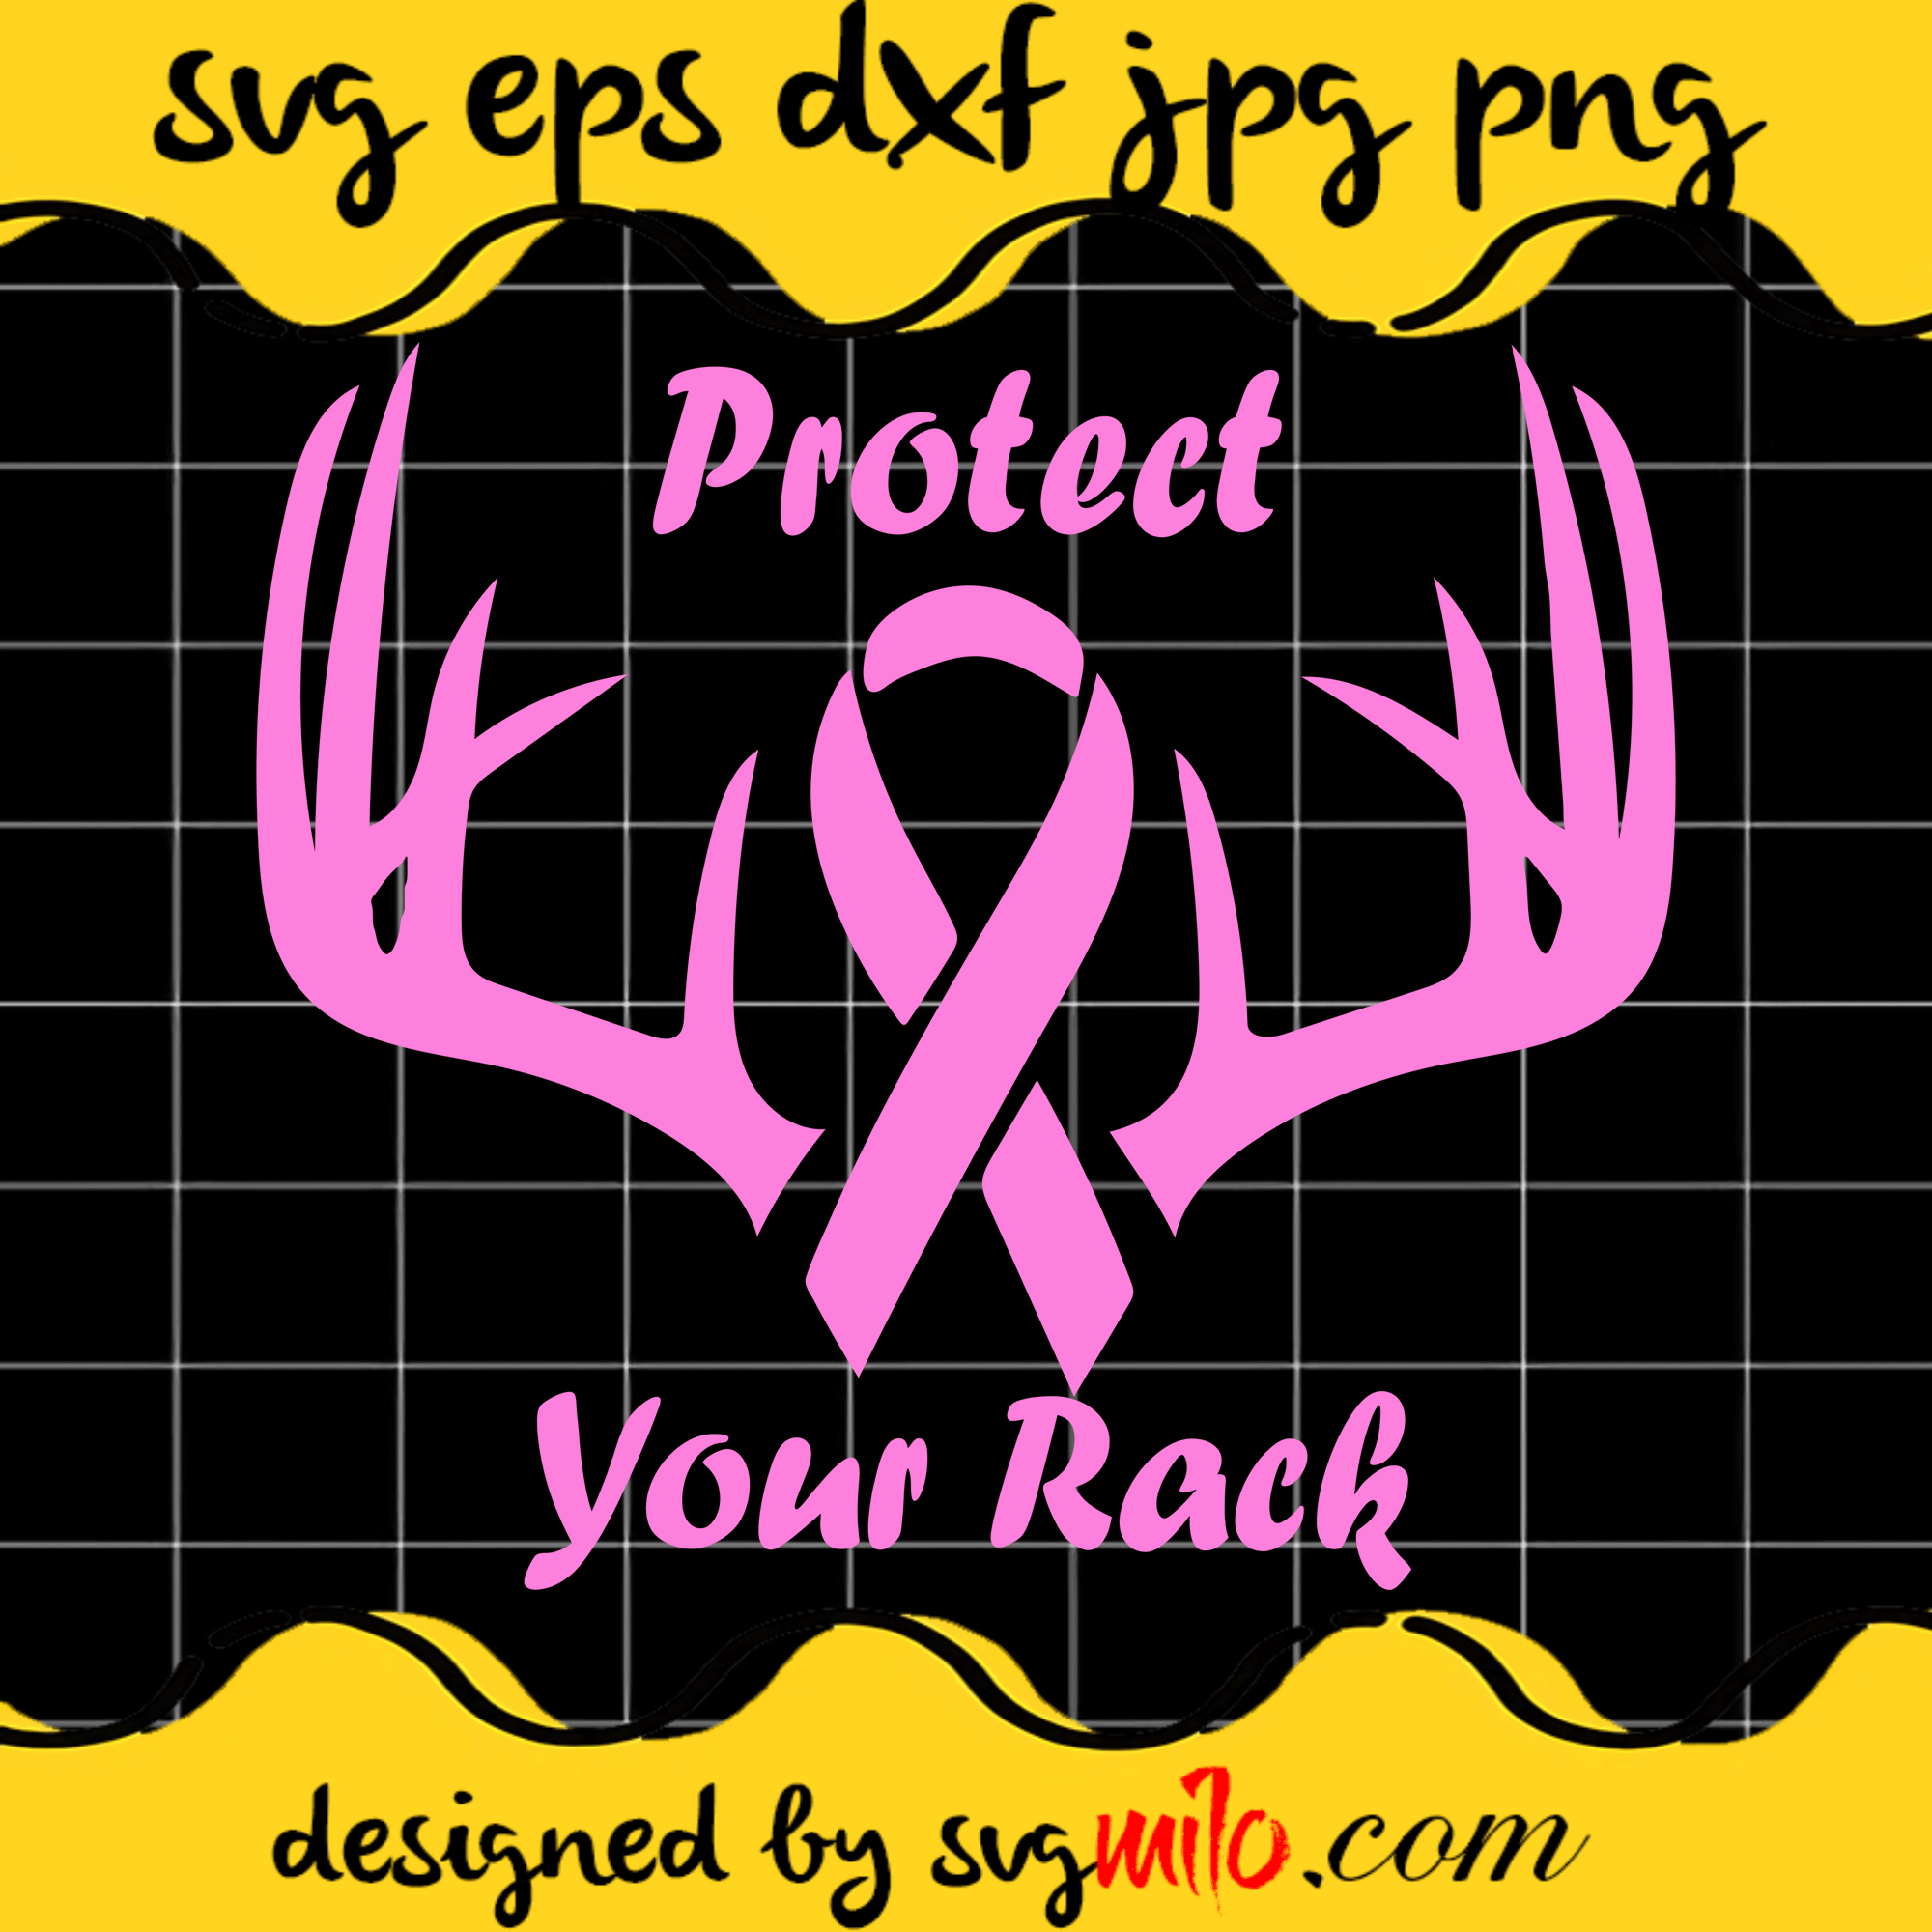 Protect Your Rack SVG, Breast Cancer SVG, EPS, PNG, DXF, Premium Quality - SVGMILO